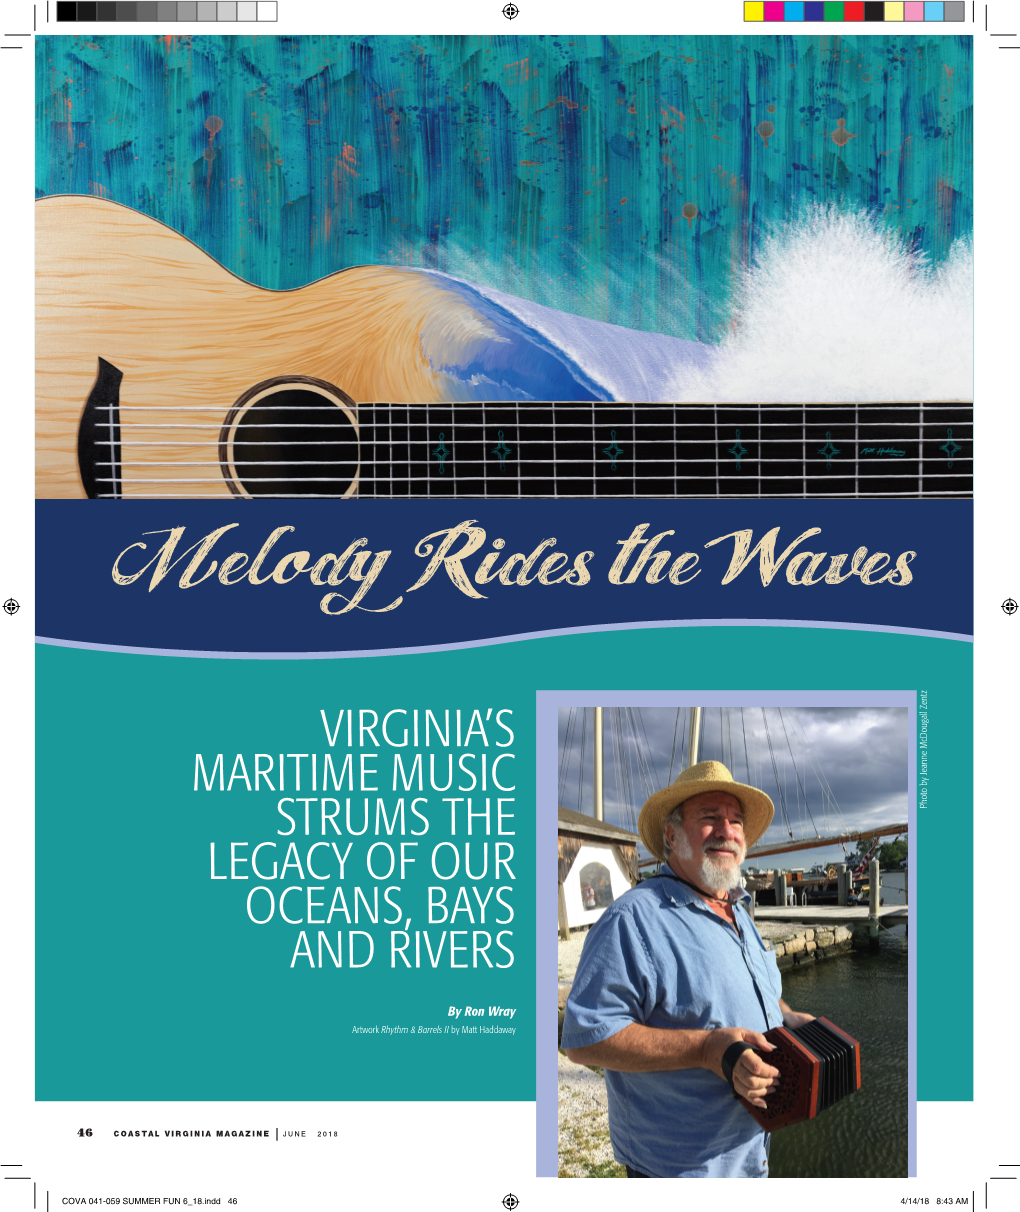 Virginia's Maritime Music Strums the Legacy of Our